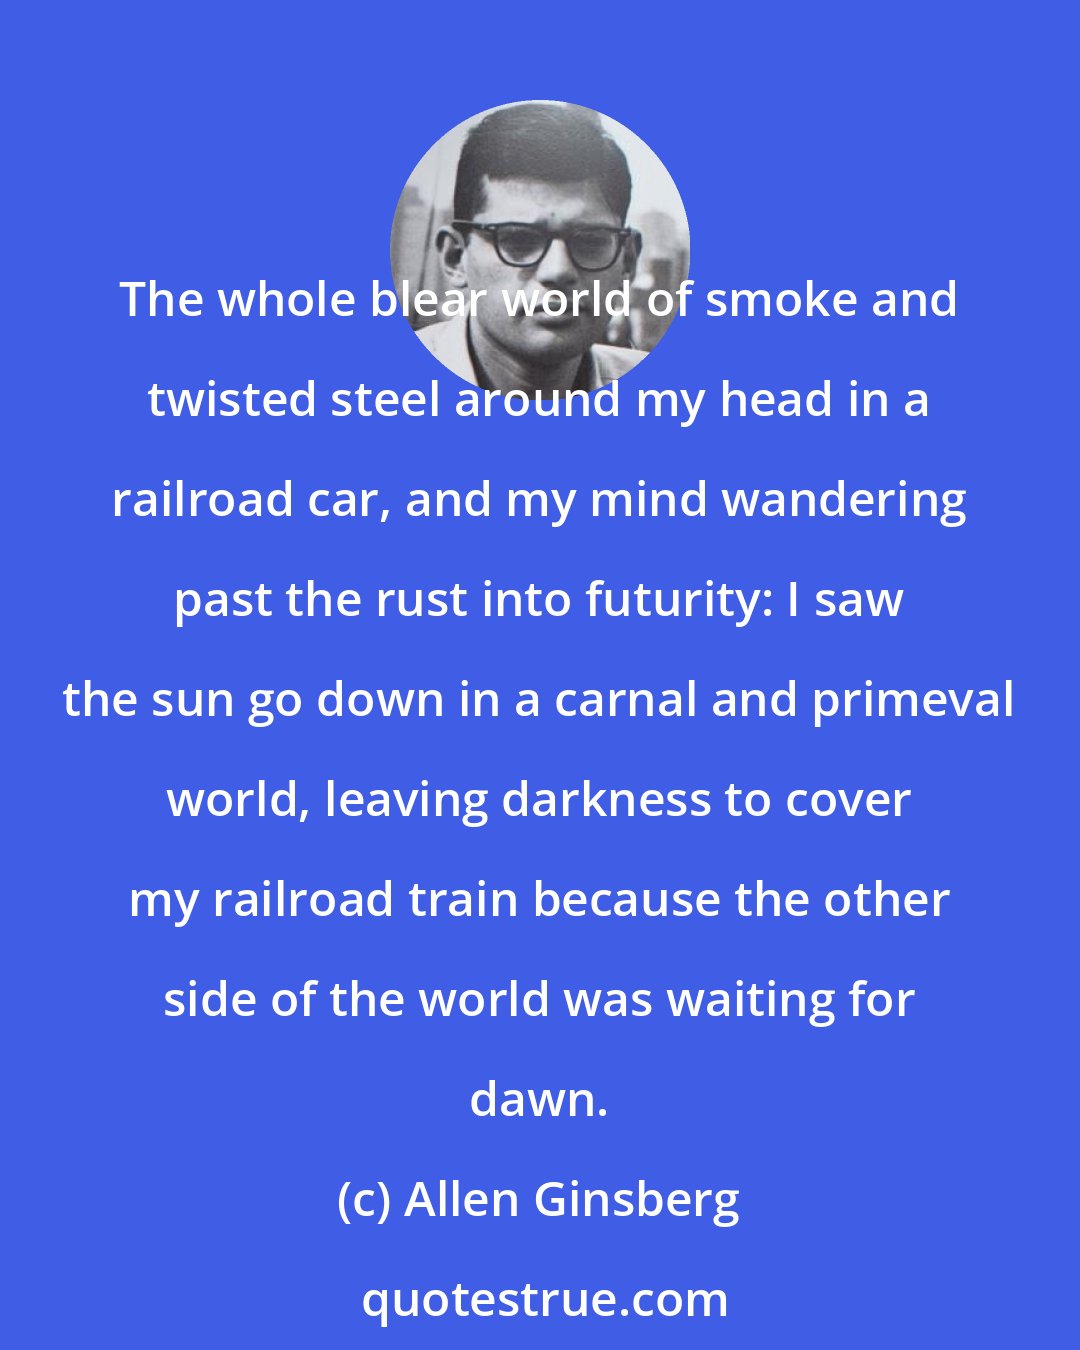 Allen Ginsberg: The whole blear world of smoke and twisted steel around my head in a railroad car, and my mind wandering past the rust into futurity: I saw the sun go down in a carnal and primeval world, leaving darkness to cover my railroad train because the other side of the world was waiting for dawn.